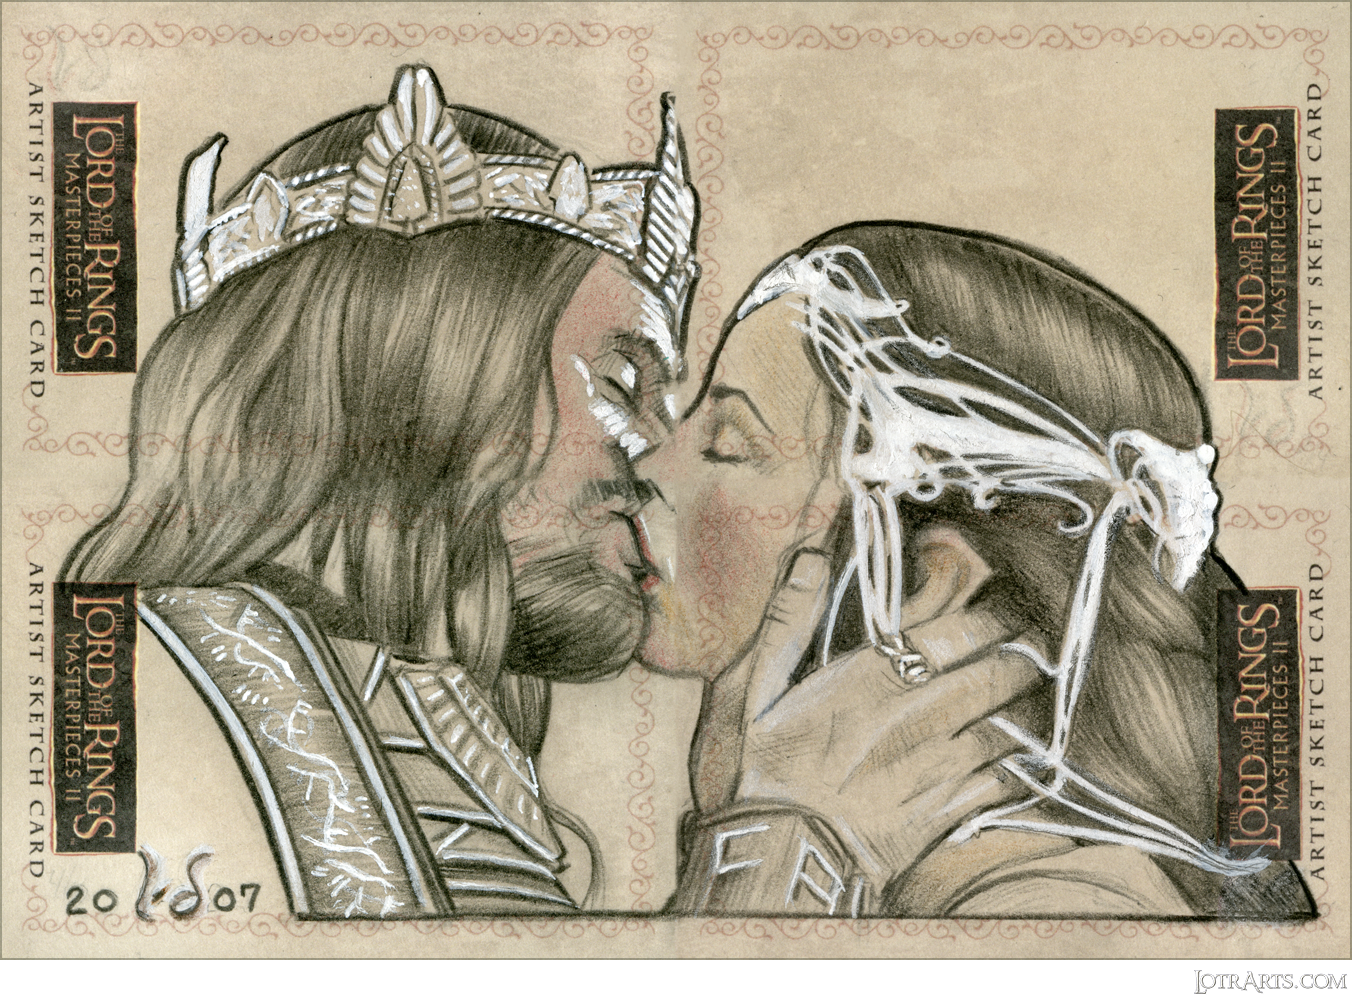 Aragorn and Arwen, four-card panel, by Doyle: artist return sketches<span class="ngViews">10 views</span>